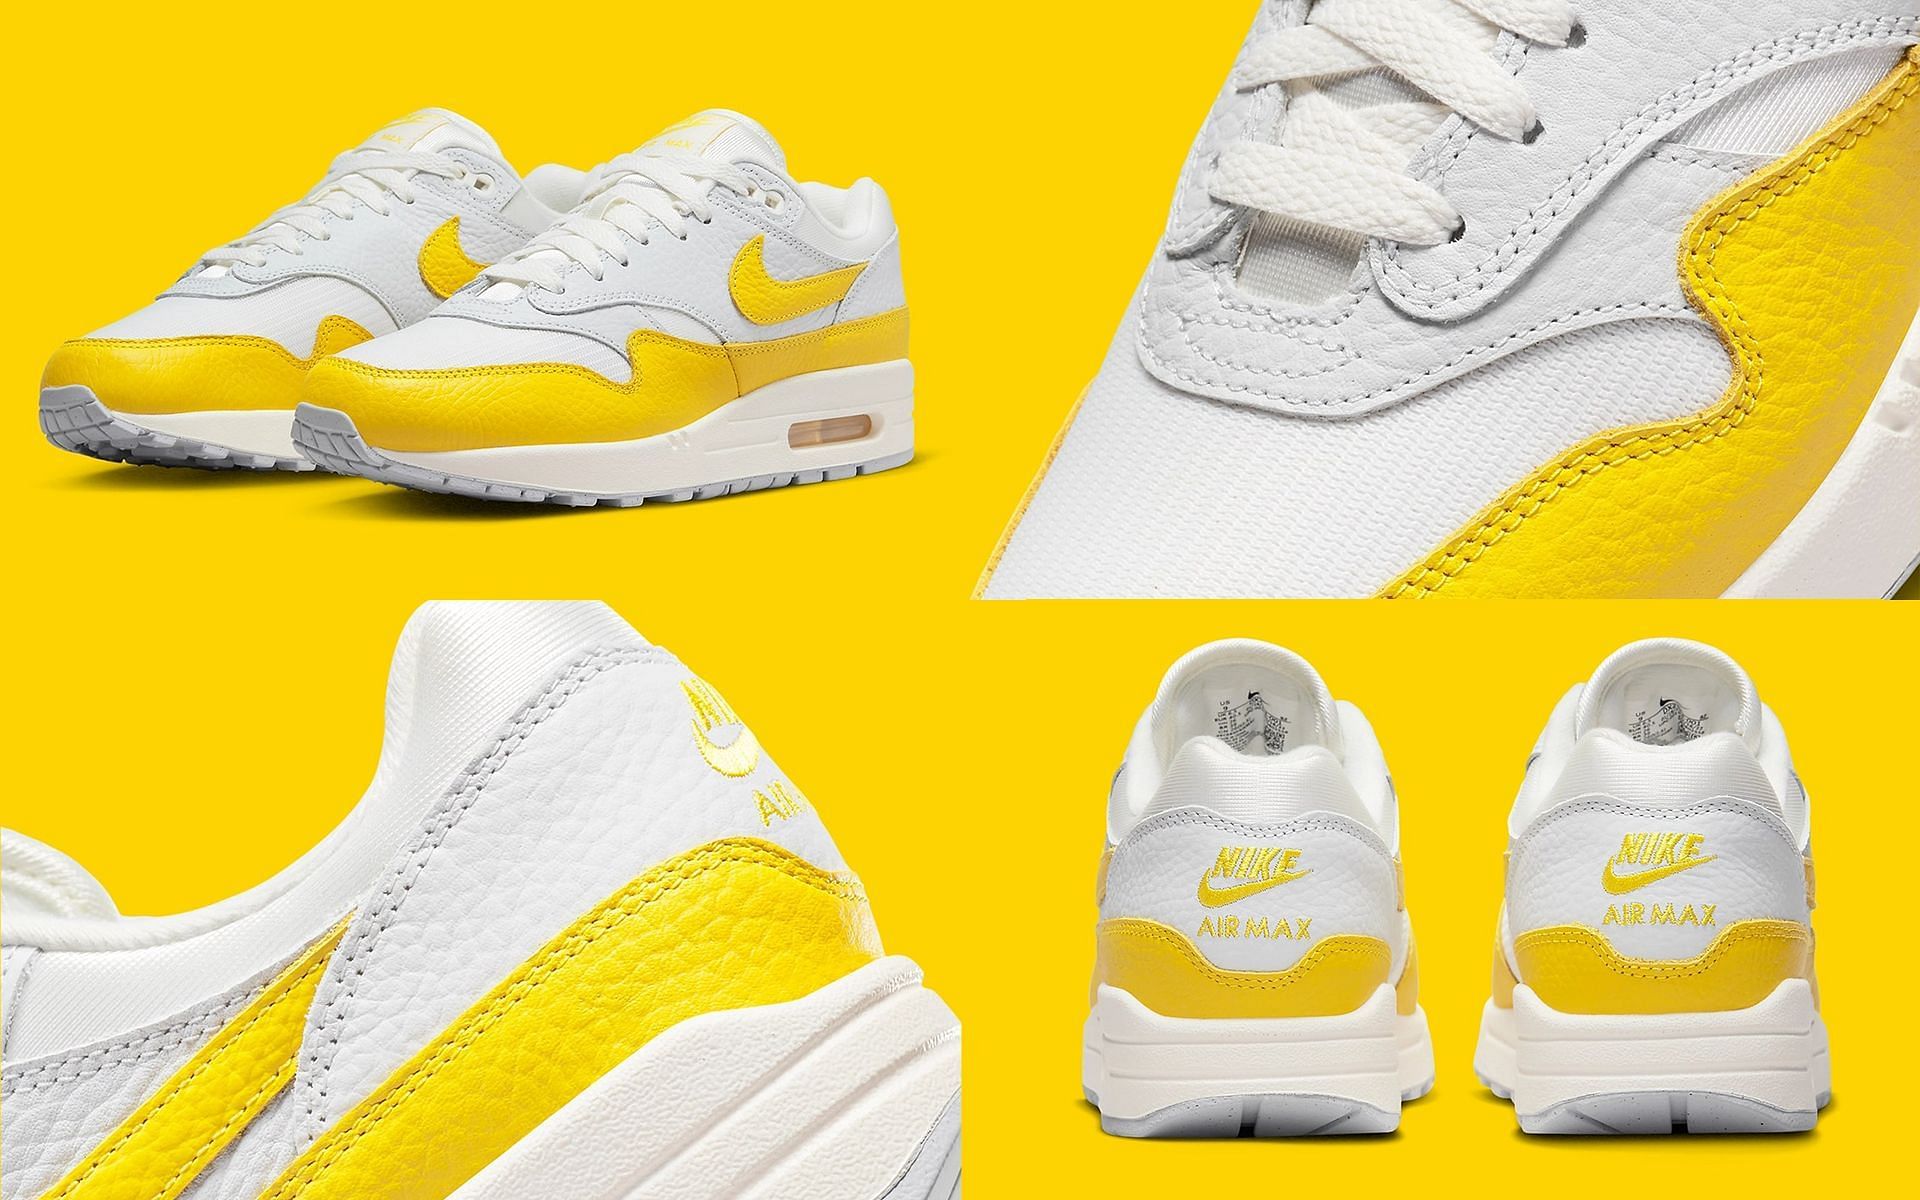 Upcoming Nike Air Max 1 White and Yellow Tumbled leather sneakers (Image via Sportskeeda)